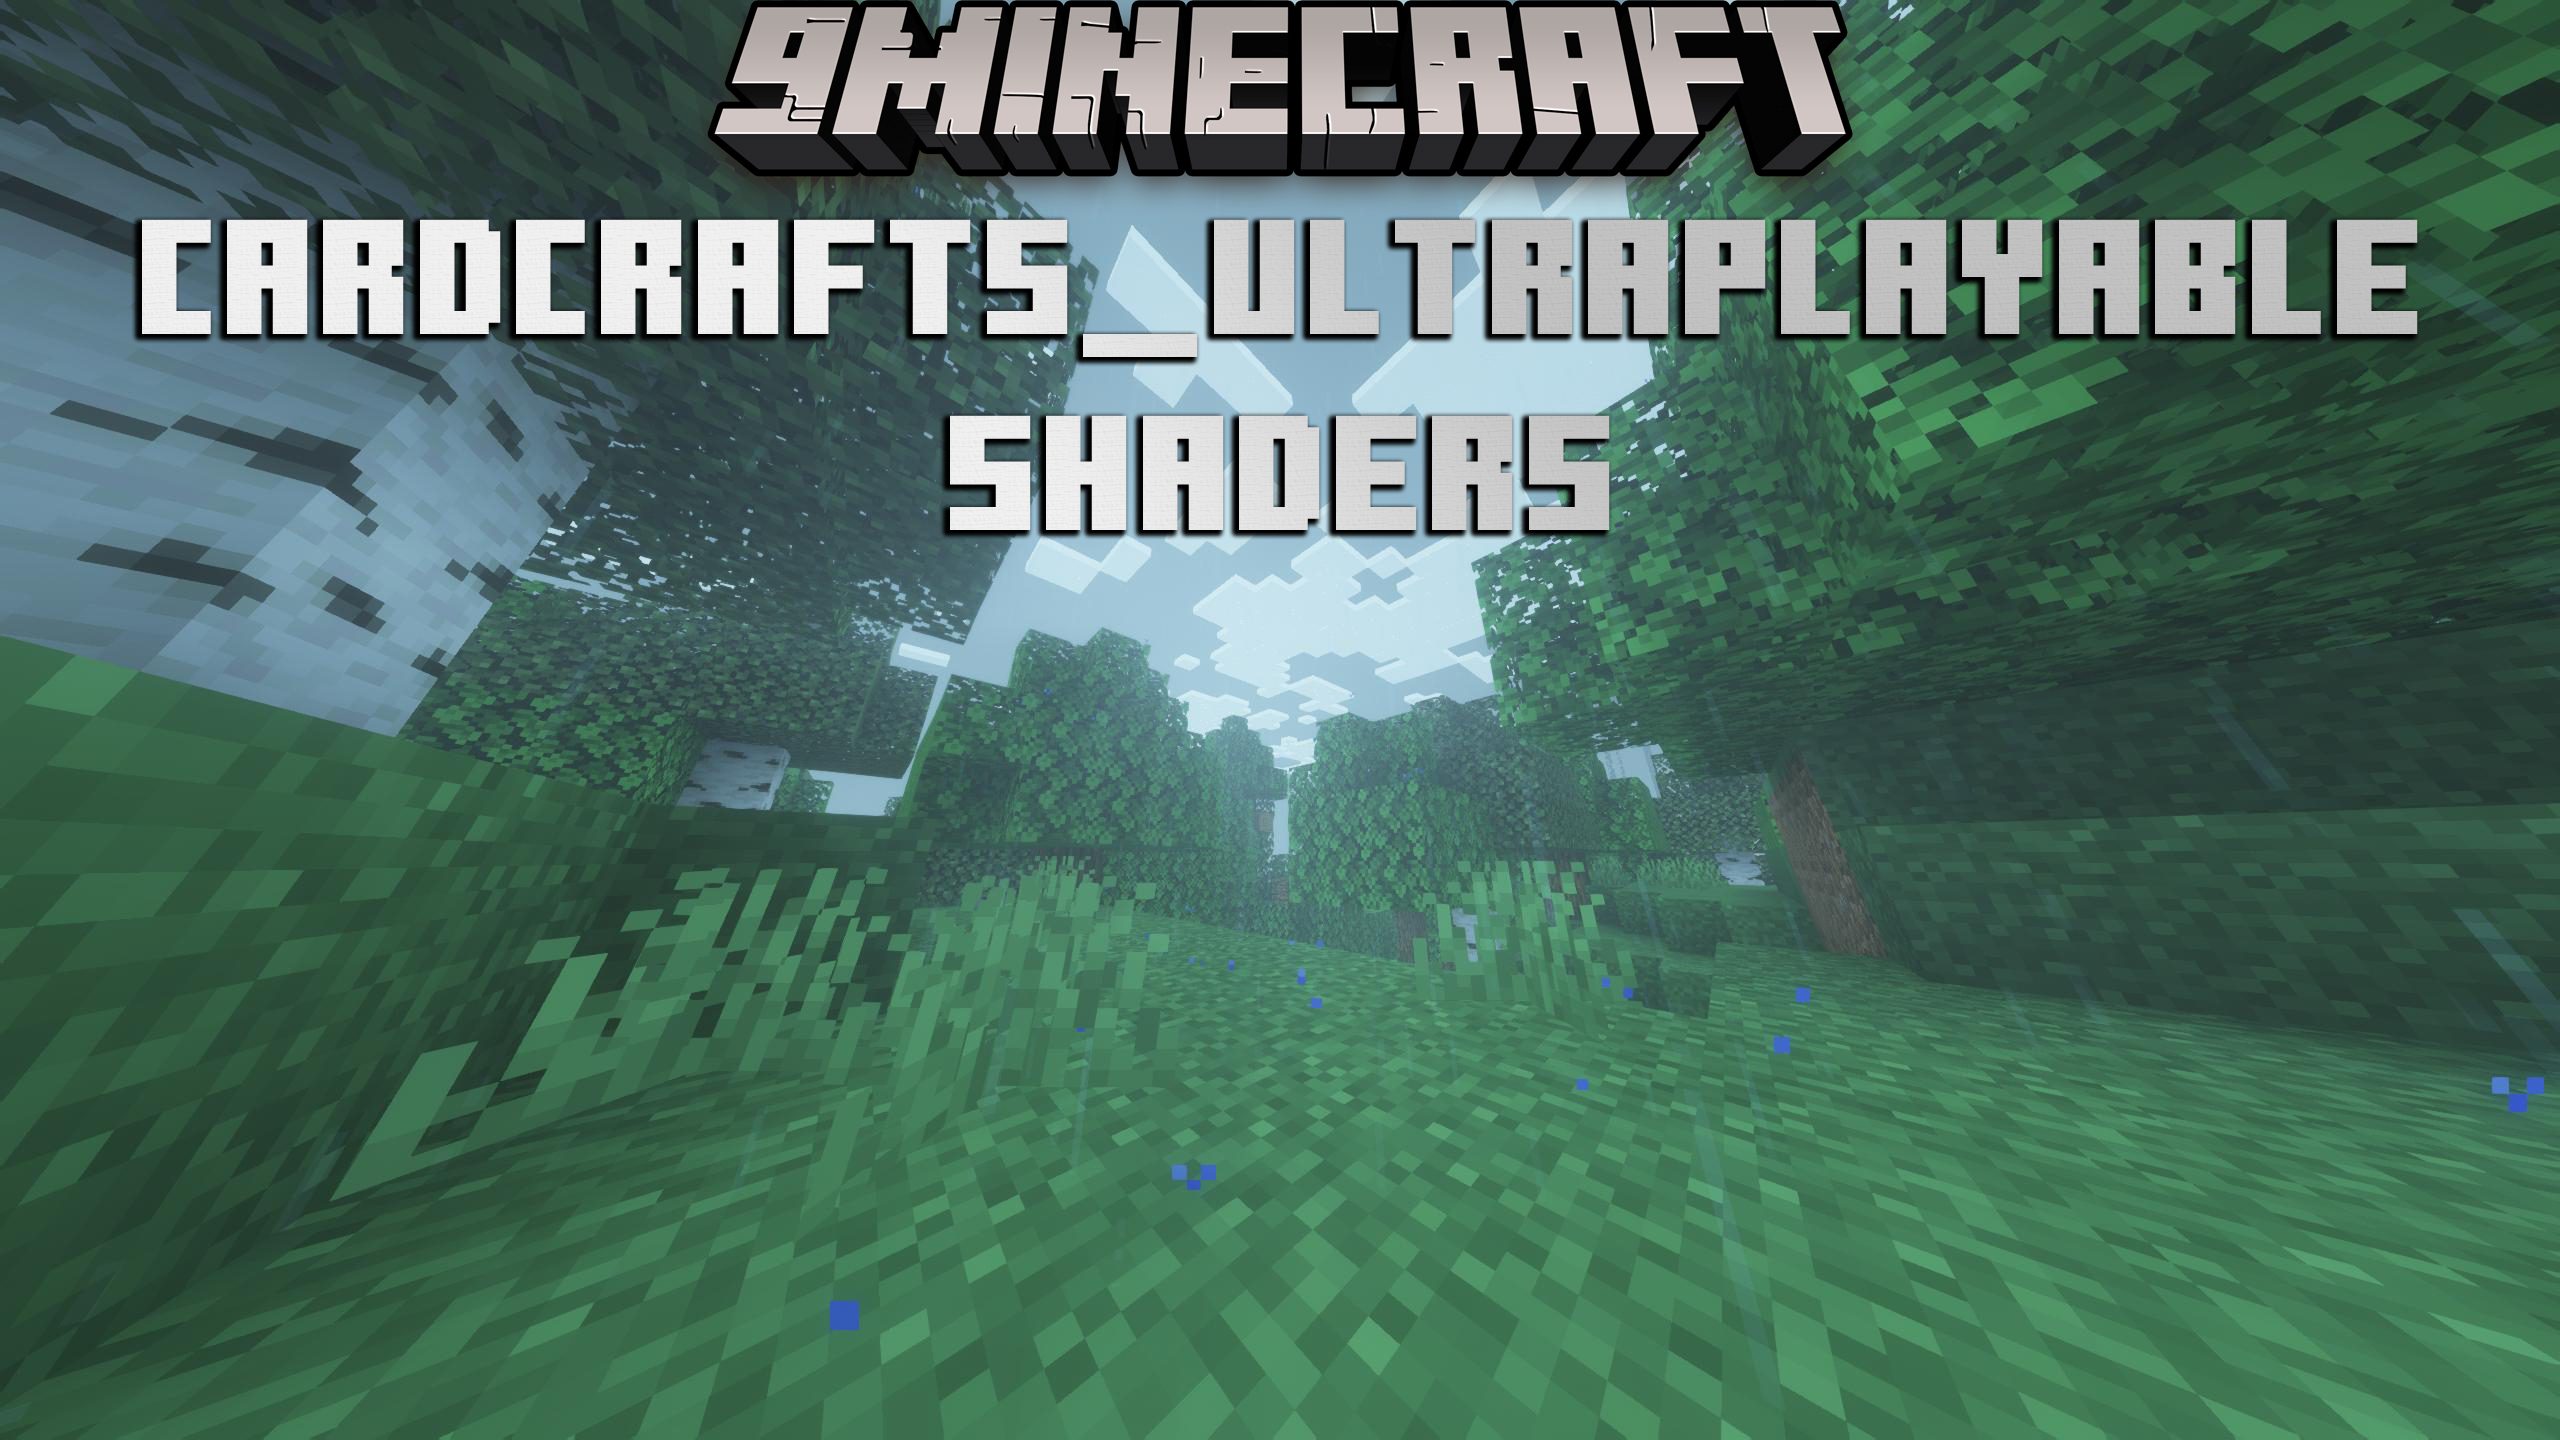 Cardcrafts_Ultraplayable Shaders (1.20.4, 1.19.4) - BSL Edit for Low-End PCs 1